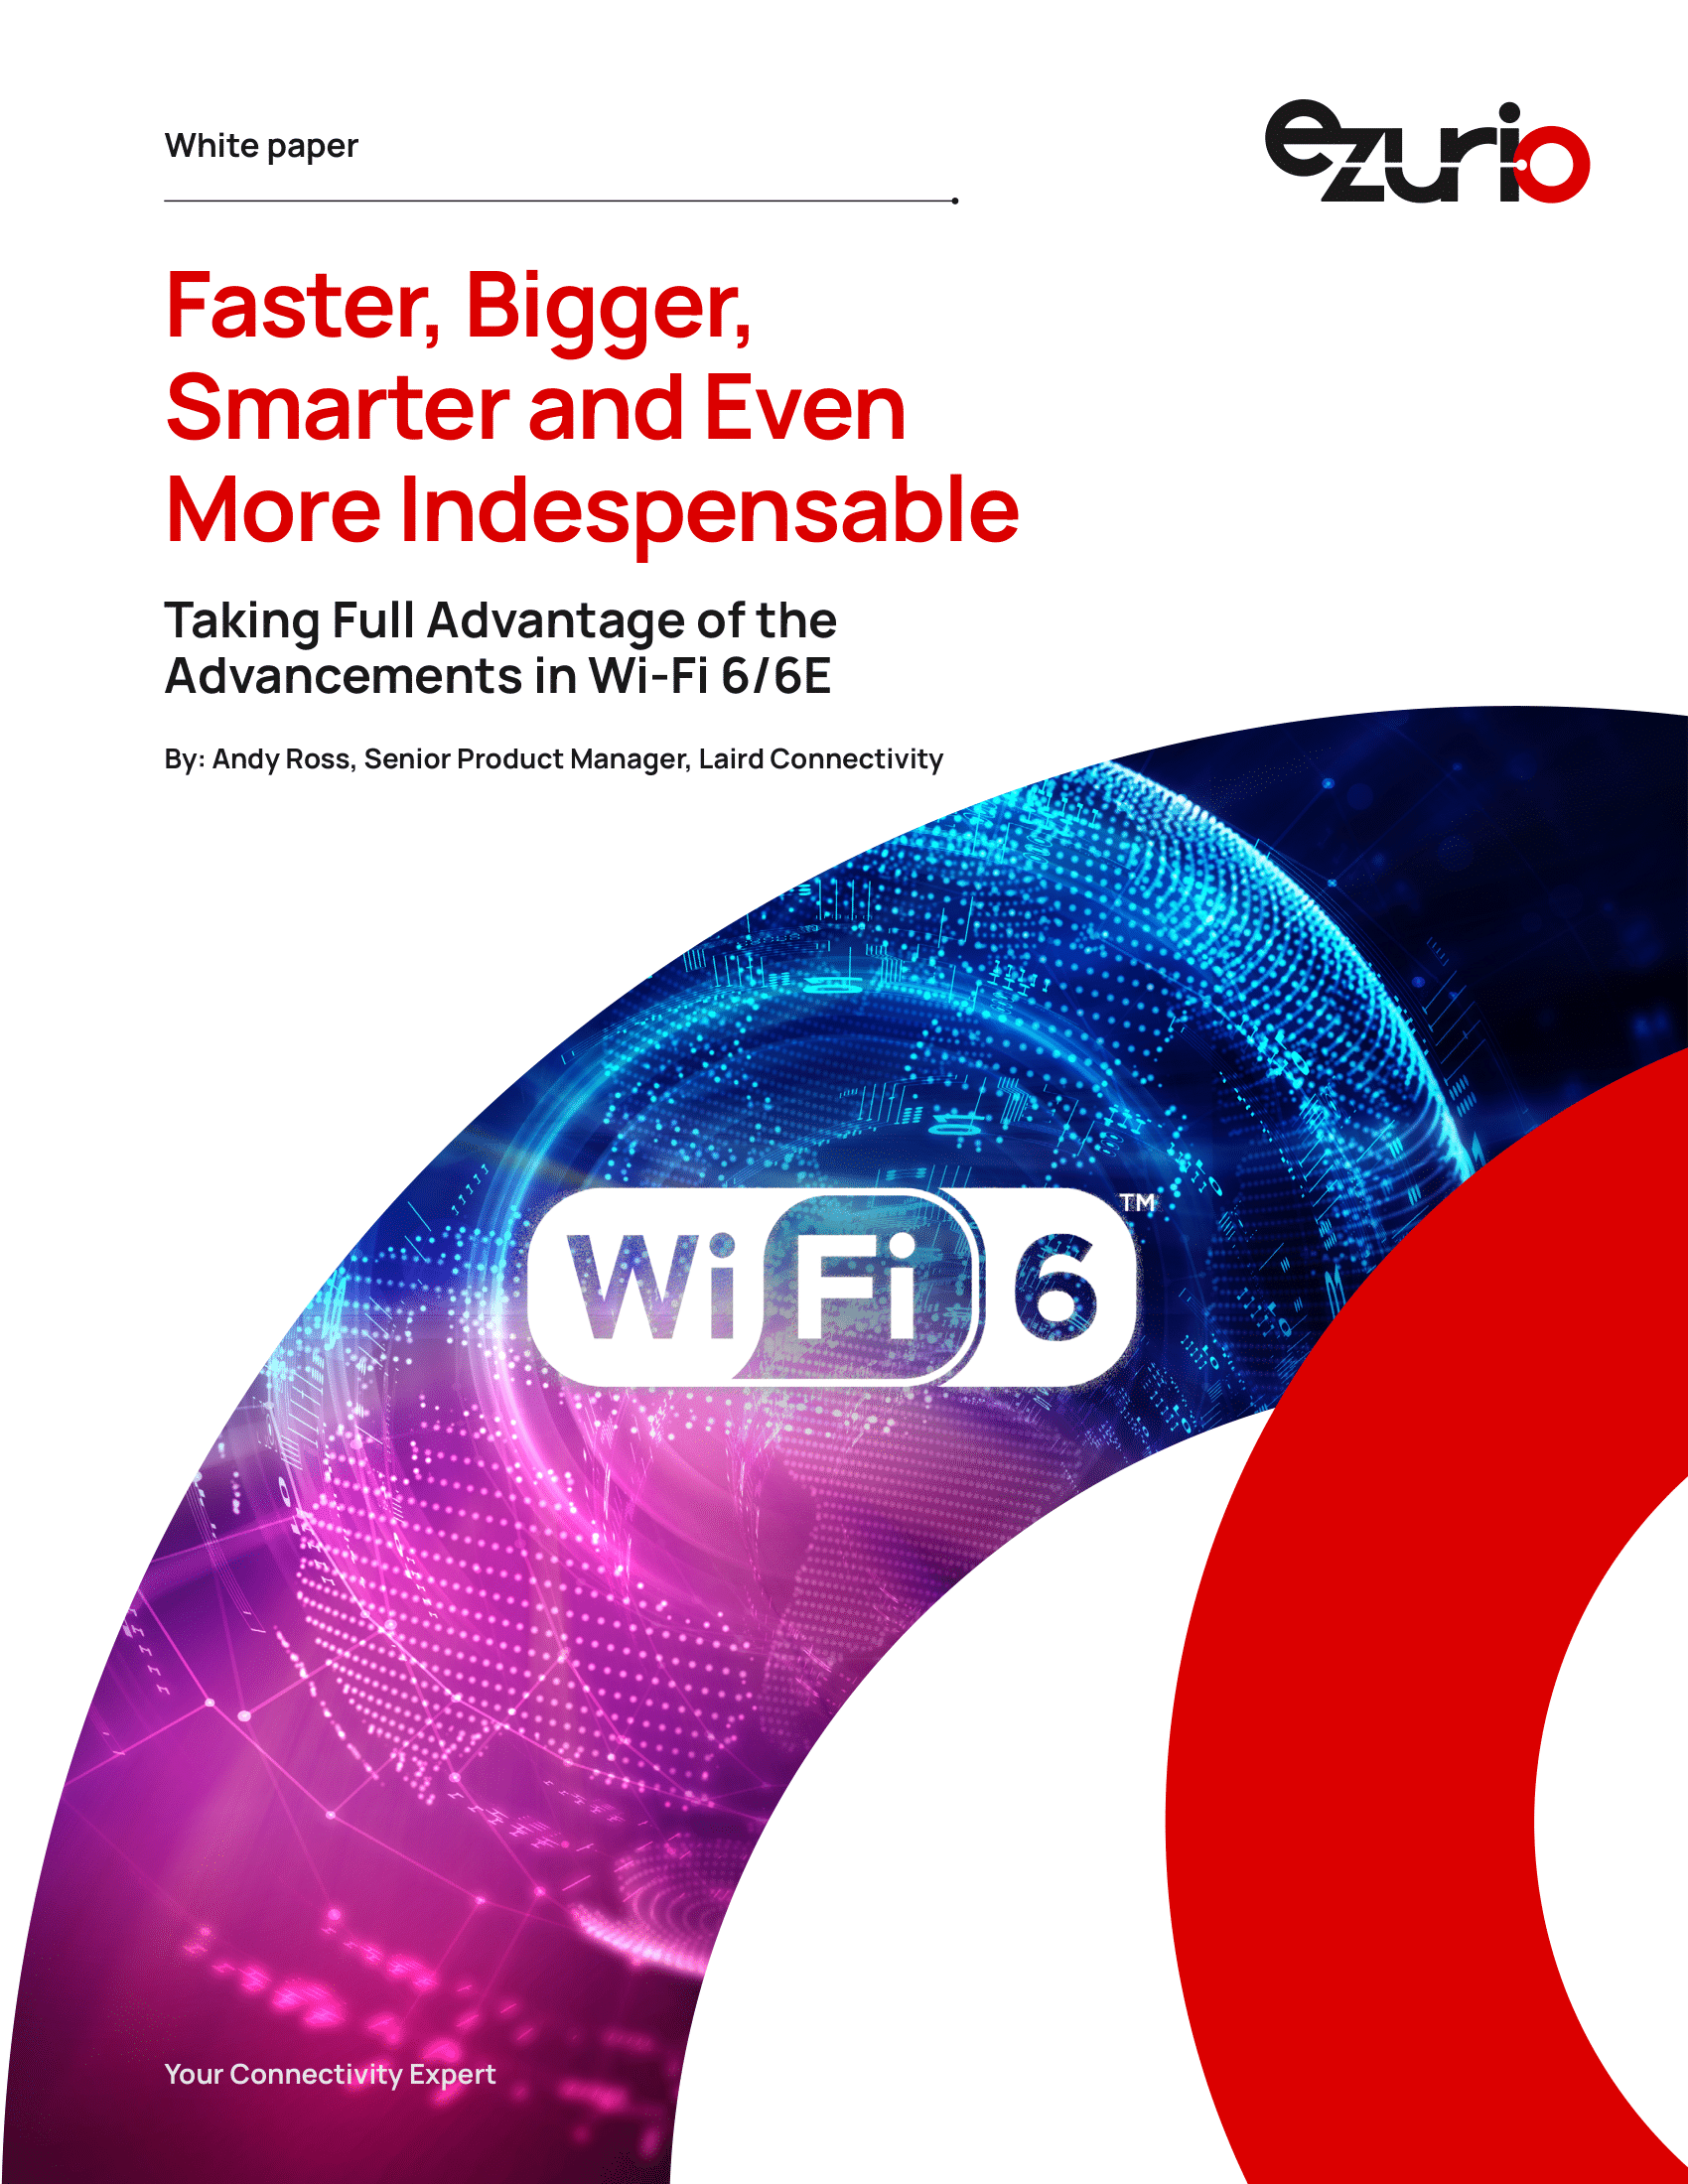 Faster, Bigger, Smarter, and Even More Indispensable 